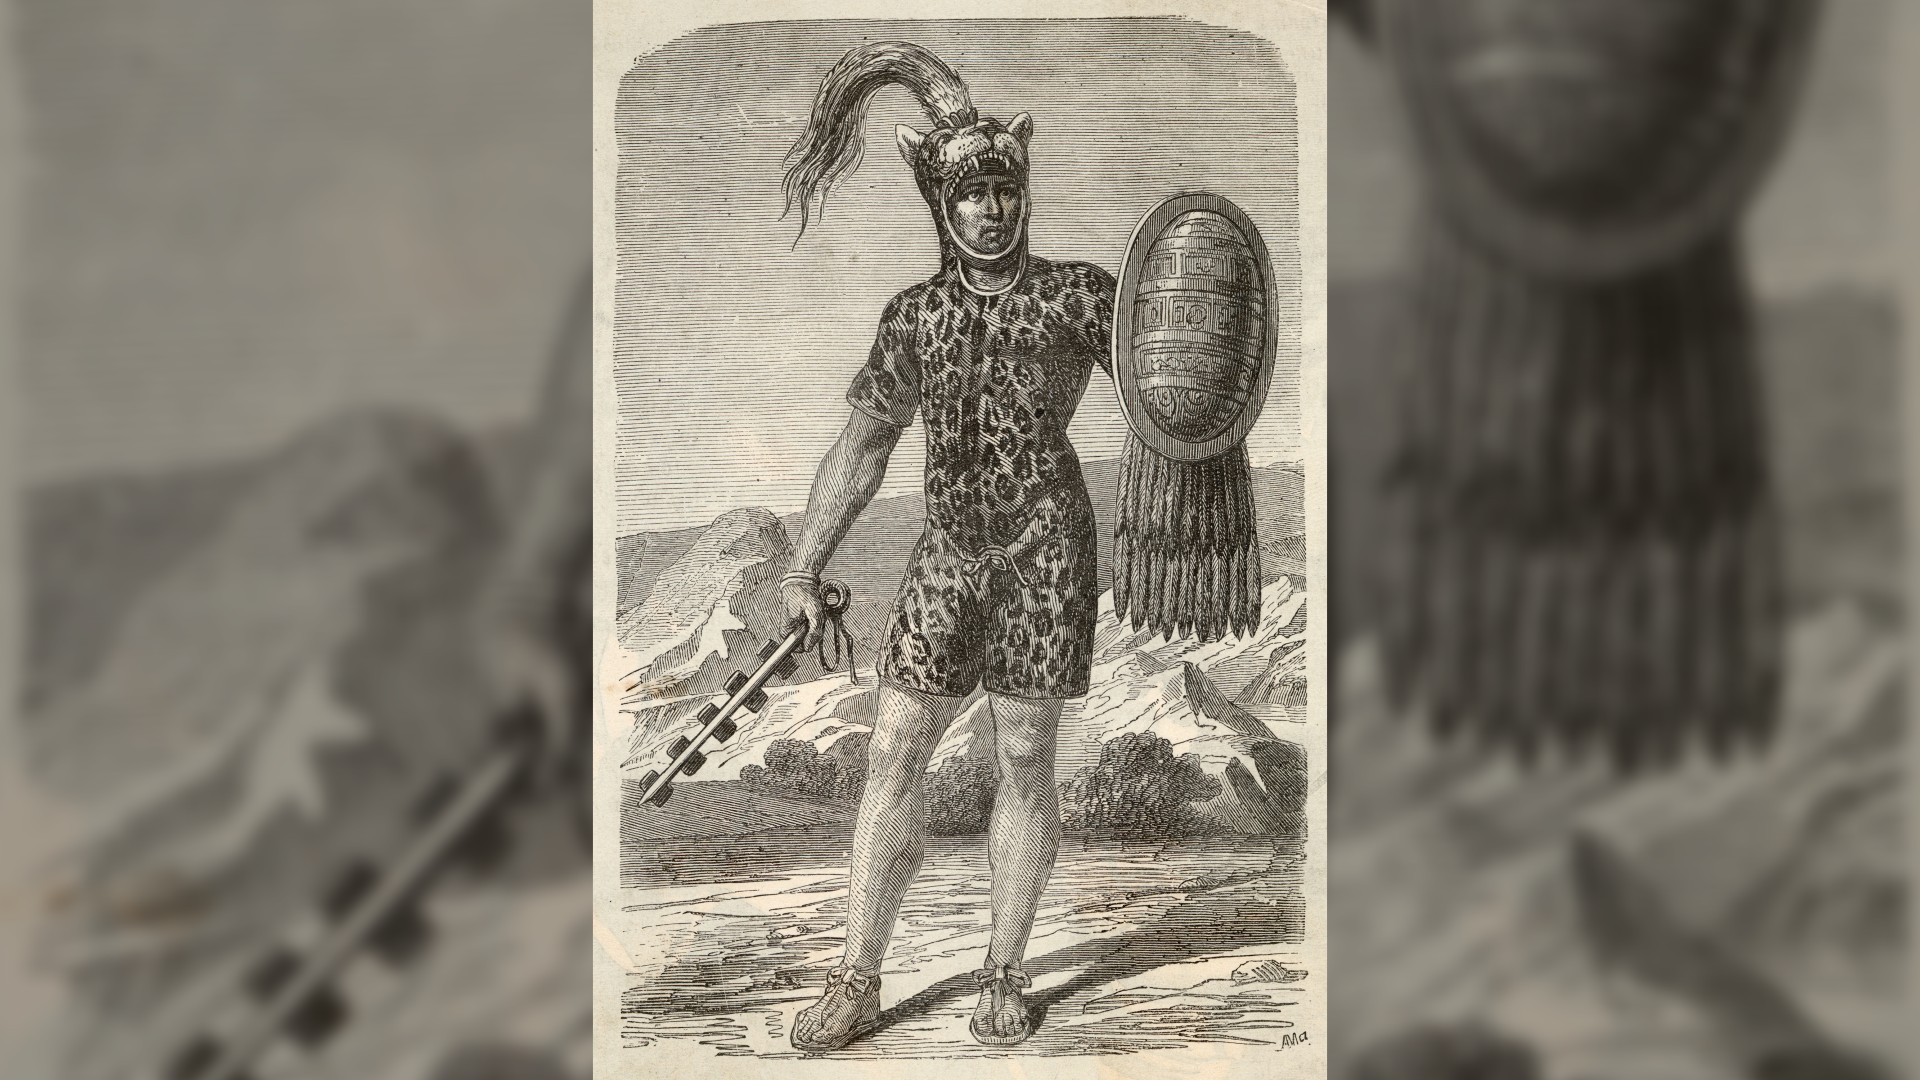 This is a drawing of Emperor Itzcoatl. He is wearing a short unitard made out of leopard skin, with his helmet made out of a leopard head with plumage coming out the top. He is holding a medium-sized oval shield with feathers hanging from the bottom in his left hand, and in his right hand he is holding a mace.